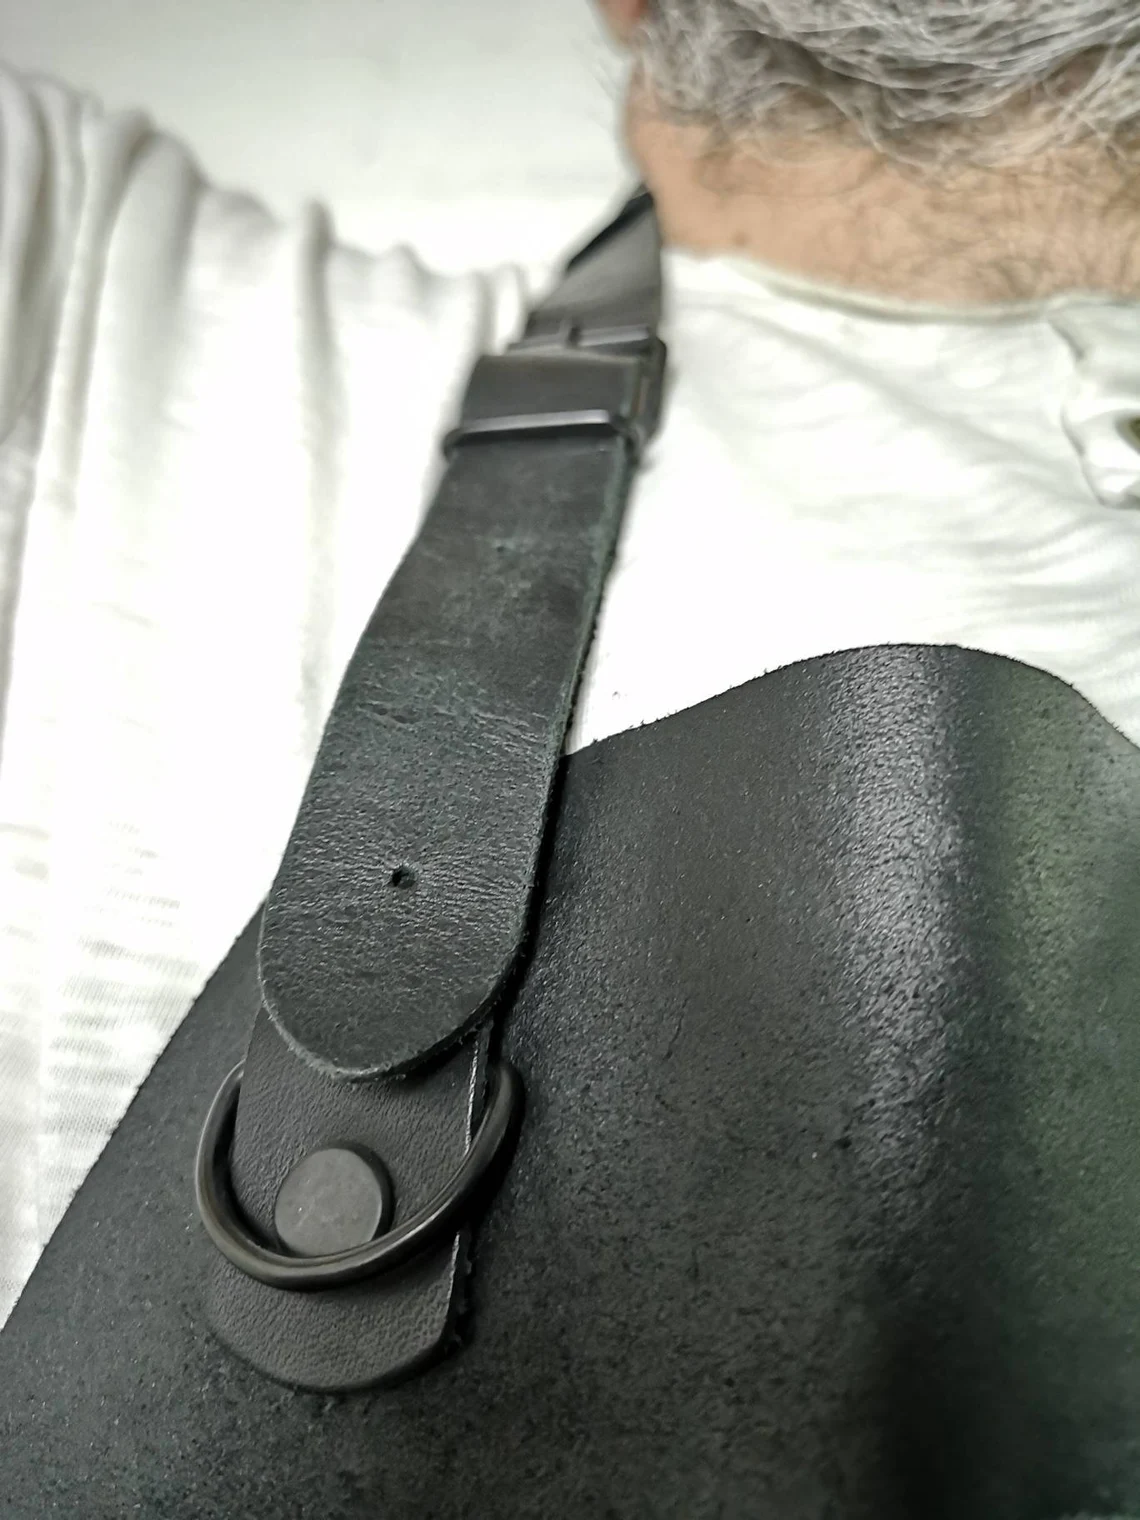 Medieval leather apron for craftsman